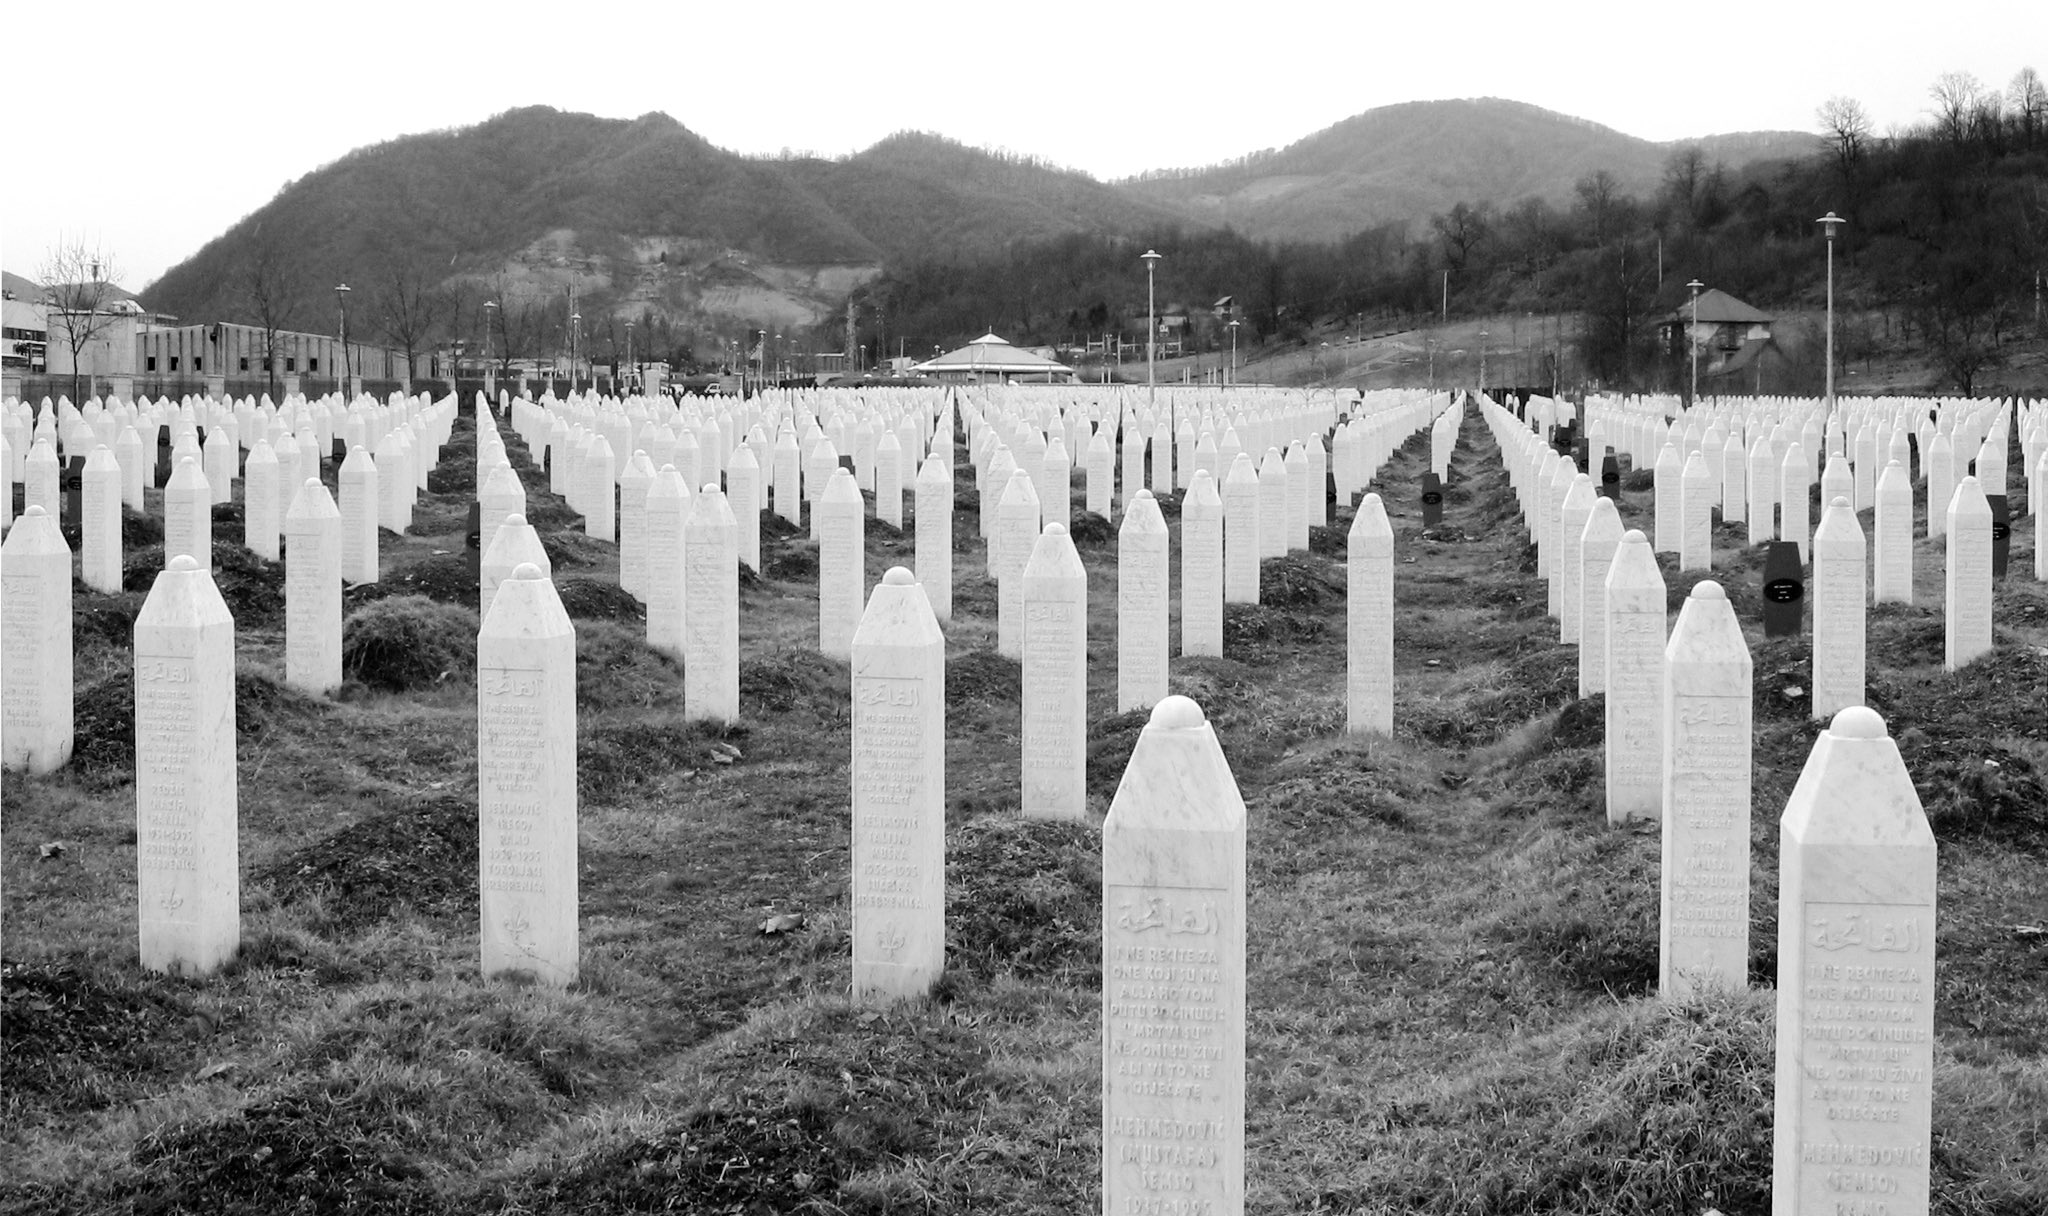 Bosnians mark 25 years since Srebrenica genocide that shocked the world